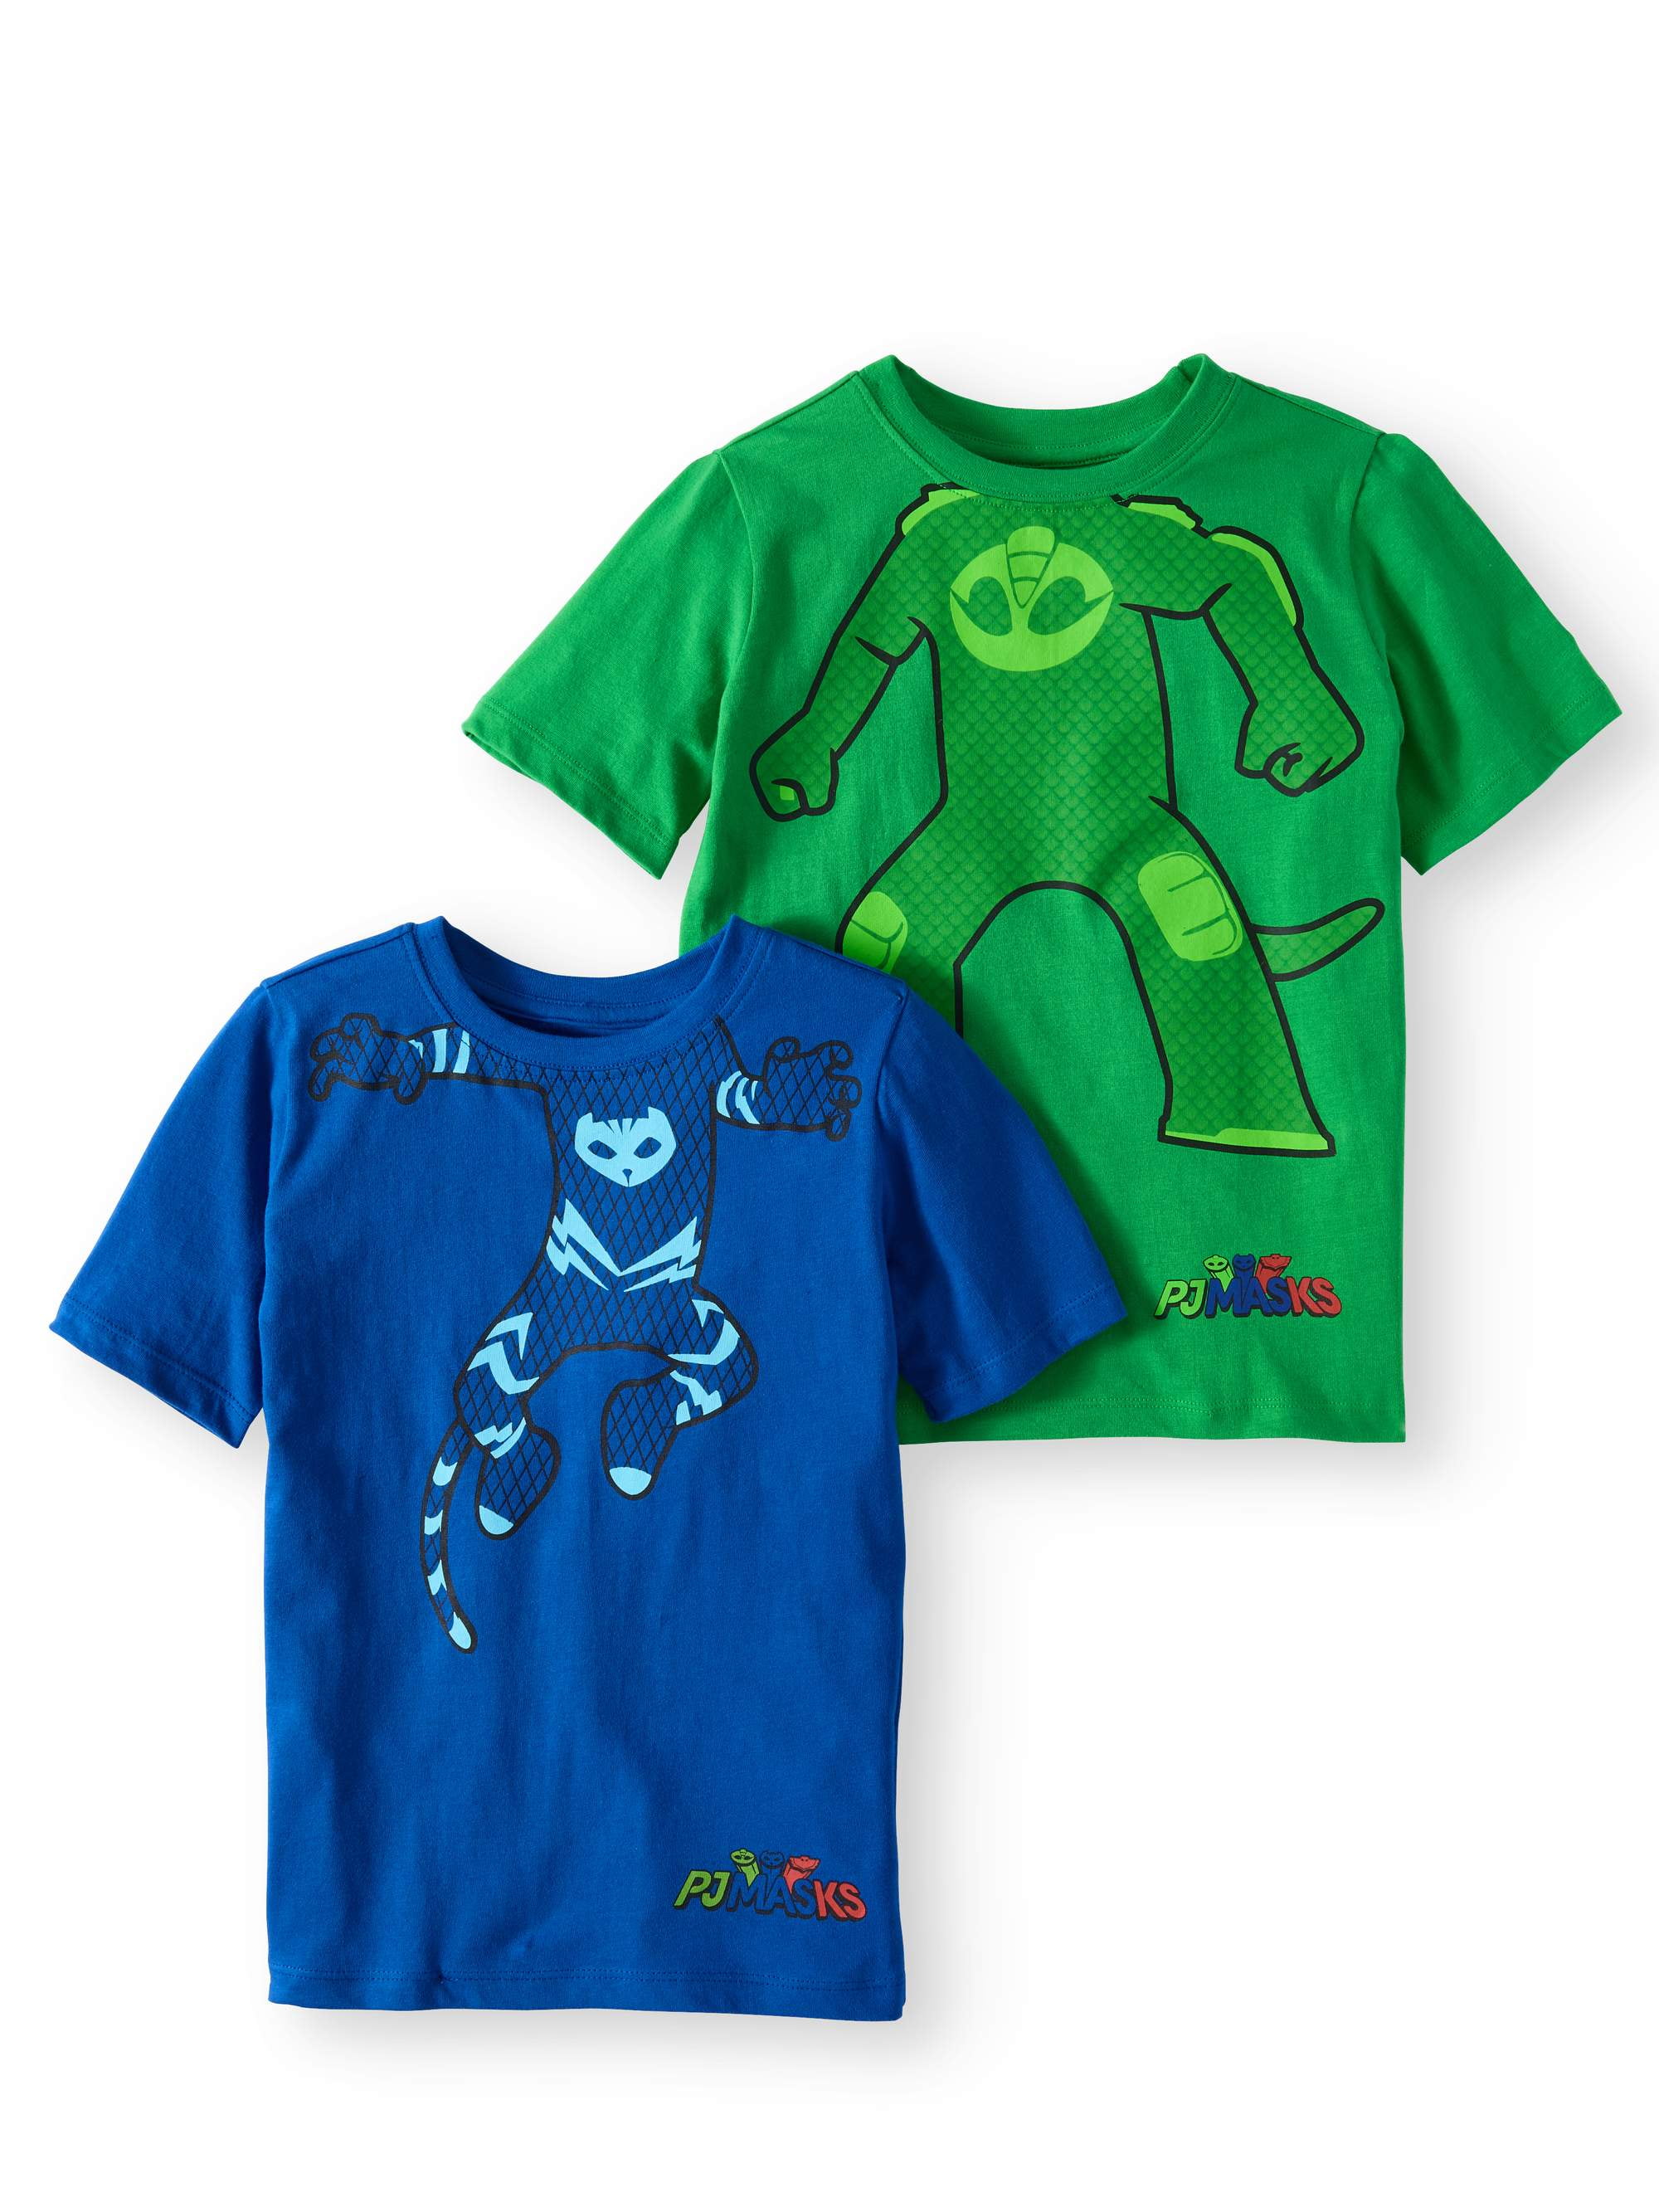 A&J DESIGN Infant & Toddler 3-Pack Heavyweight Cotton T-Shirts 5T Size 12M